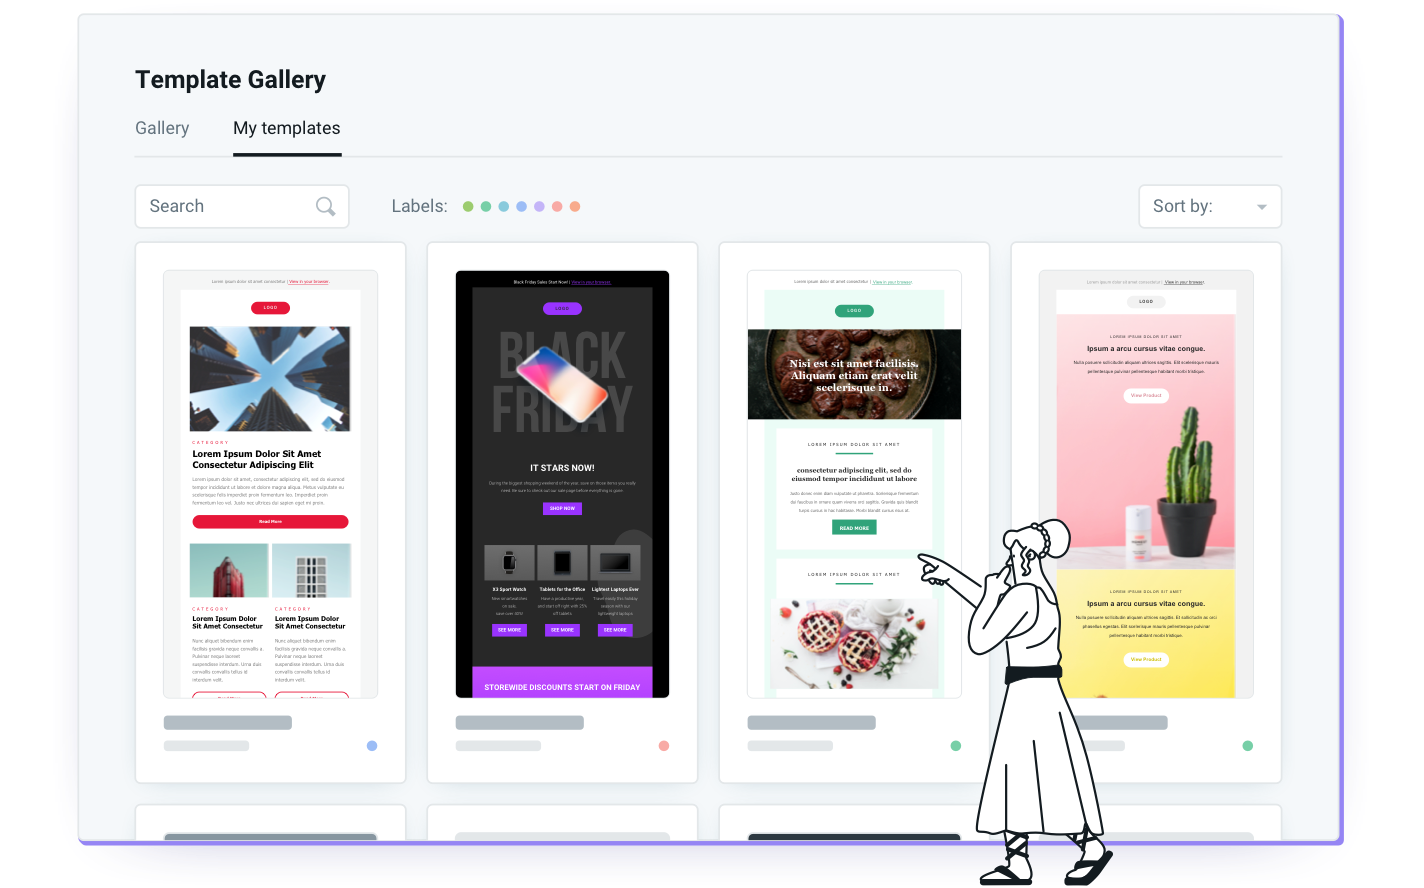 Mailjet's template gallery for efficient workflows.